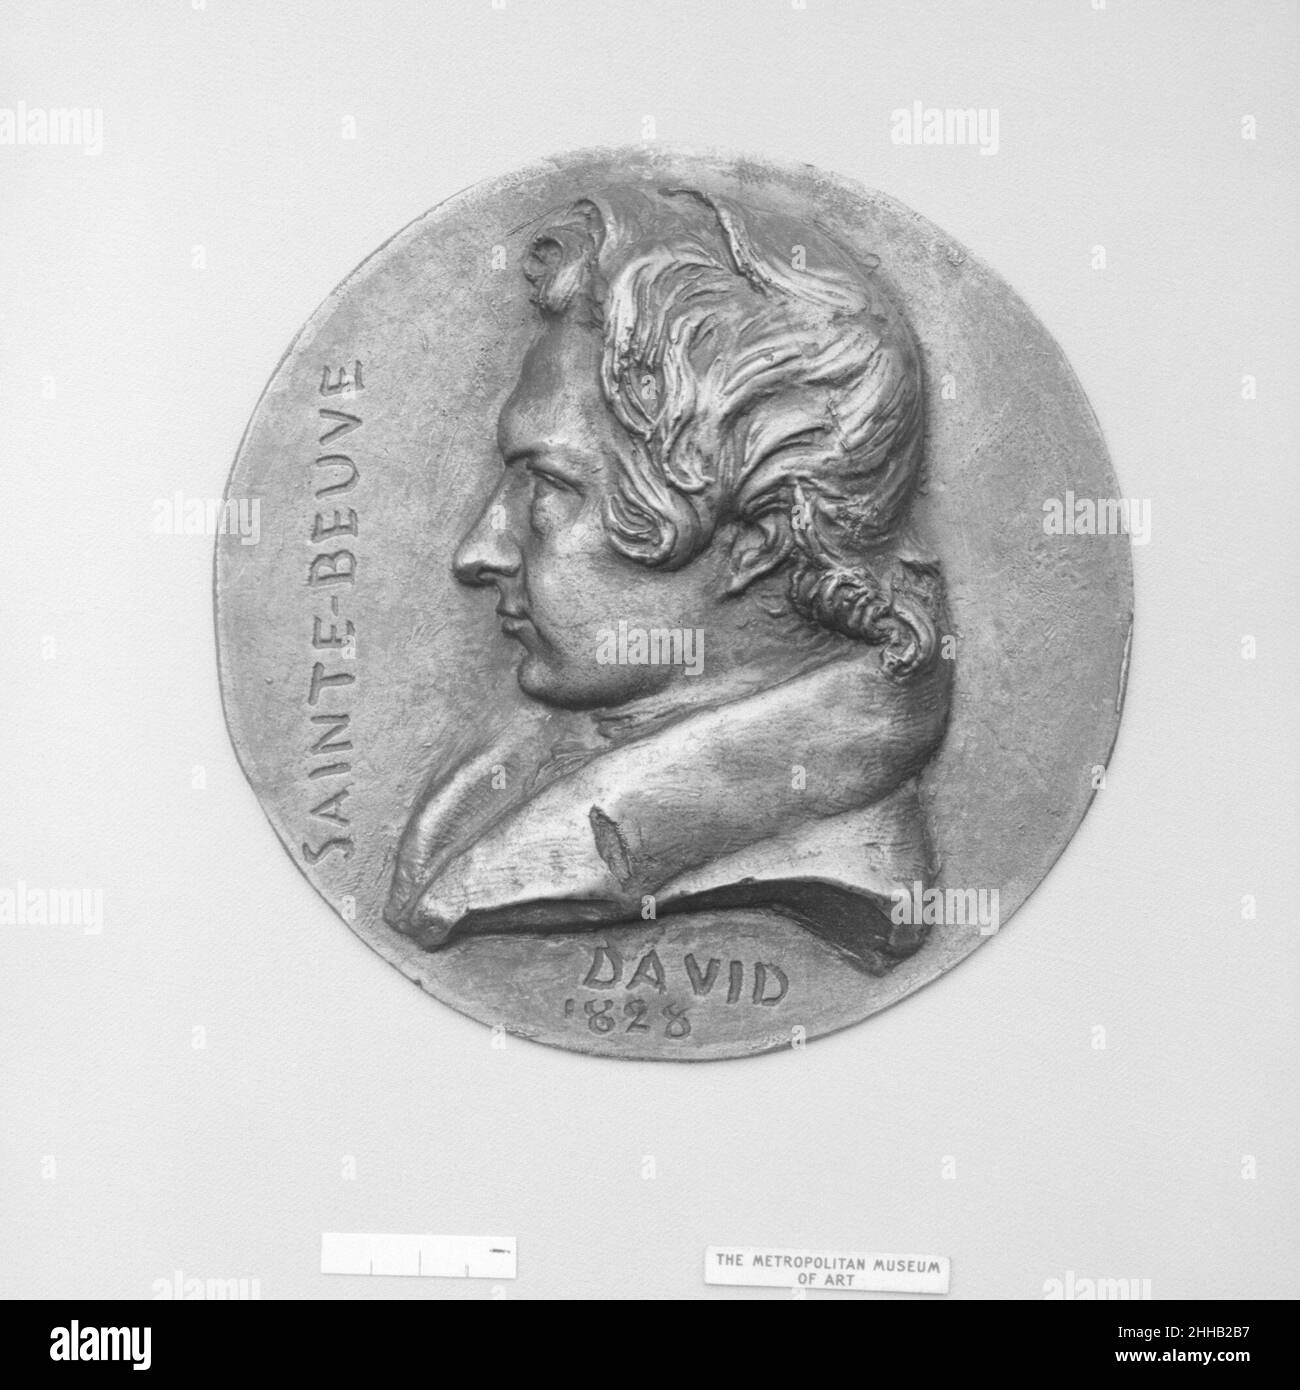 Charles Augustin Sainte-Beuve (1804–1869), French man-of-letters and Academician 1828 Pierre Jean David d'Angers French Pierre-Jean David d’Angers was the most prolific and one of the most important French sculptors of the first half of the nineteenth century. Throughout his almost fifty-year career (1819–1856) David remained true to his conviction that sculptural monuments dedicated to the achievements of great men and women most permanently and vividly express the greatness of a people. He continuously sought commissions for monuments portraying historical and contemporary figures whom he ad Stock Photo